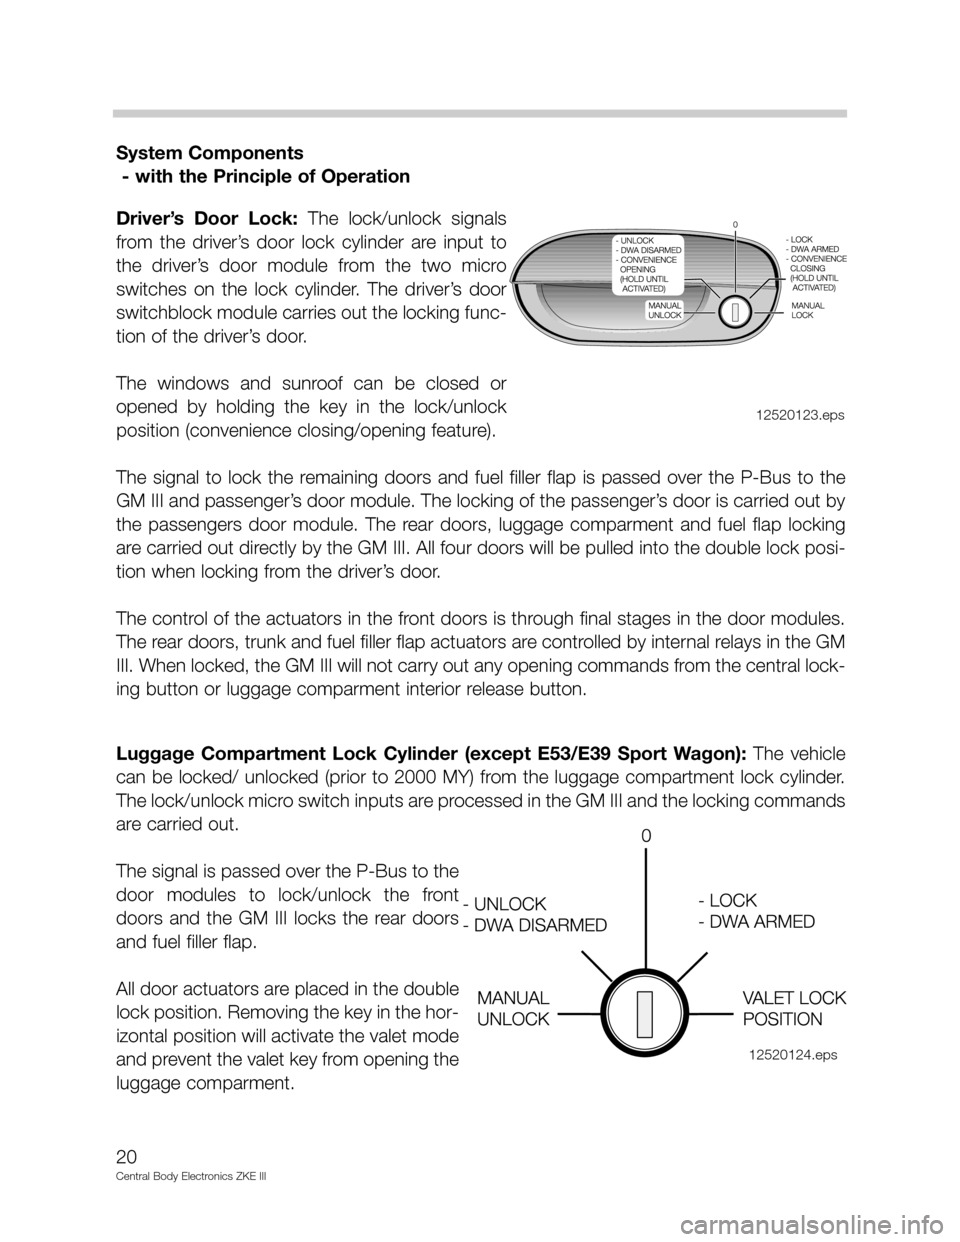 BMW 525I 2003 E39 Central Body Electronics ZKE Manual System Components 
- with the Principle of Operation
Driver’s  Door  Lock: The  lock/unlock  signals
from  the  driver’s  door  lock  cylinder  are  input  to
the  driver’s  door  module  from  